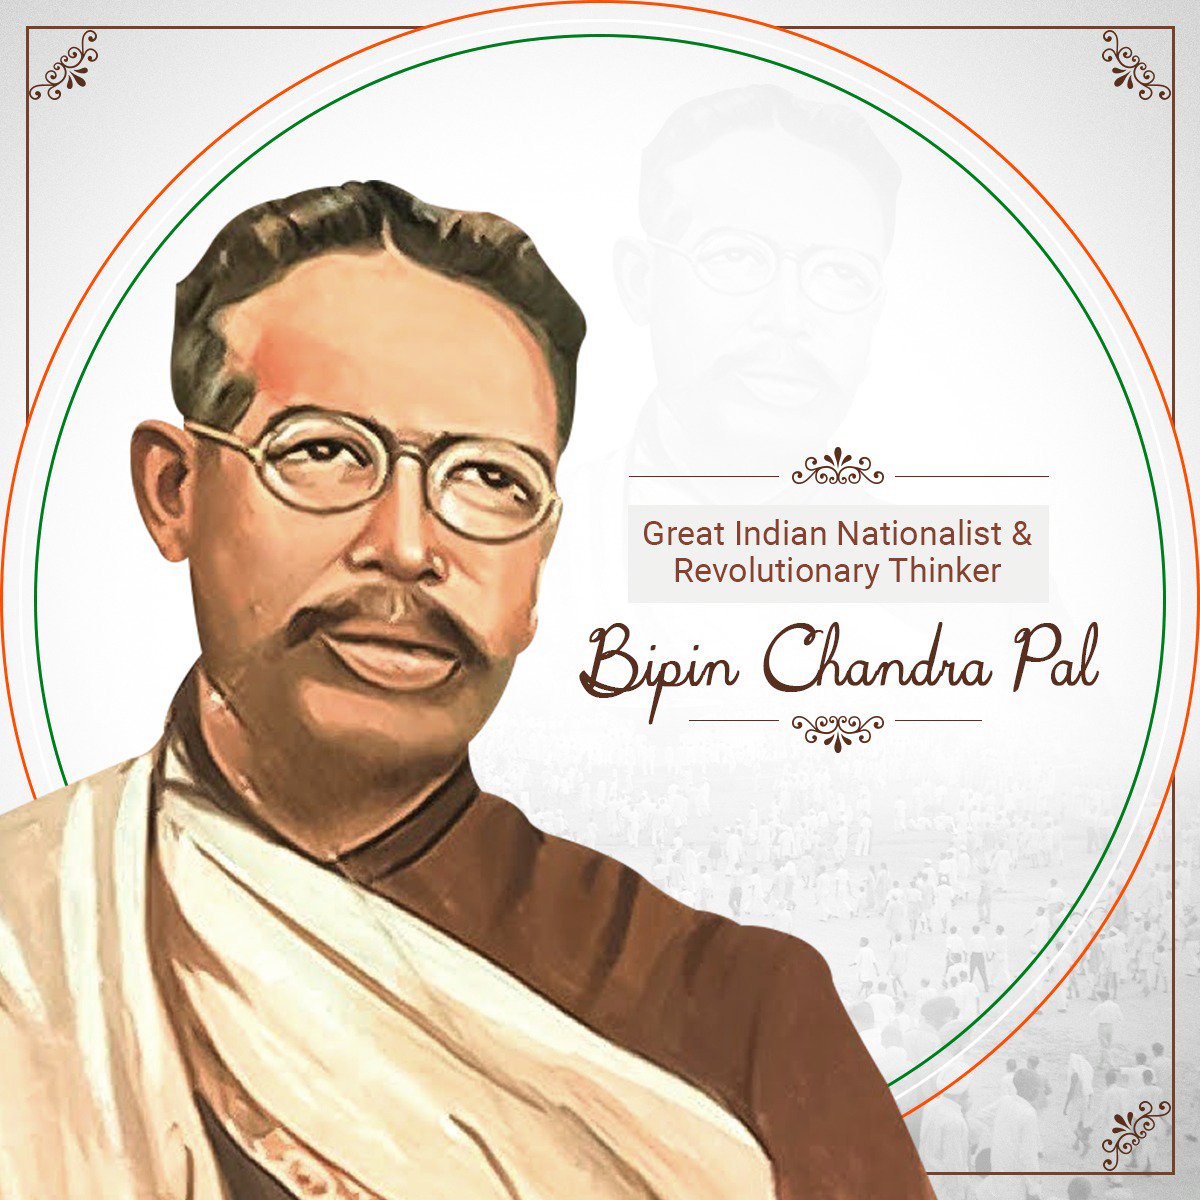 Piyush Goyal Bipin Chandra Pal, the great freedom fighter on his birth anniversary. He will continue to inspire generations through his nationalism & revolutionary thinking